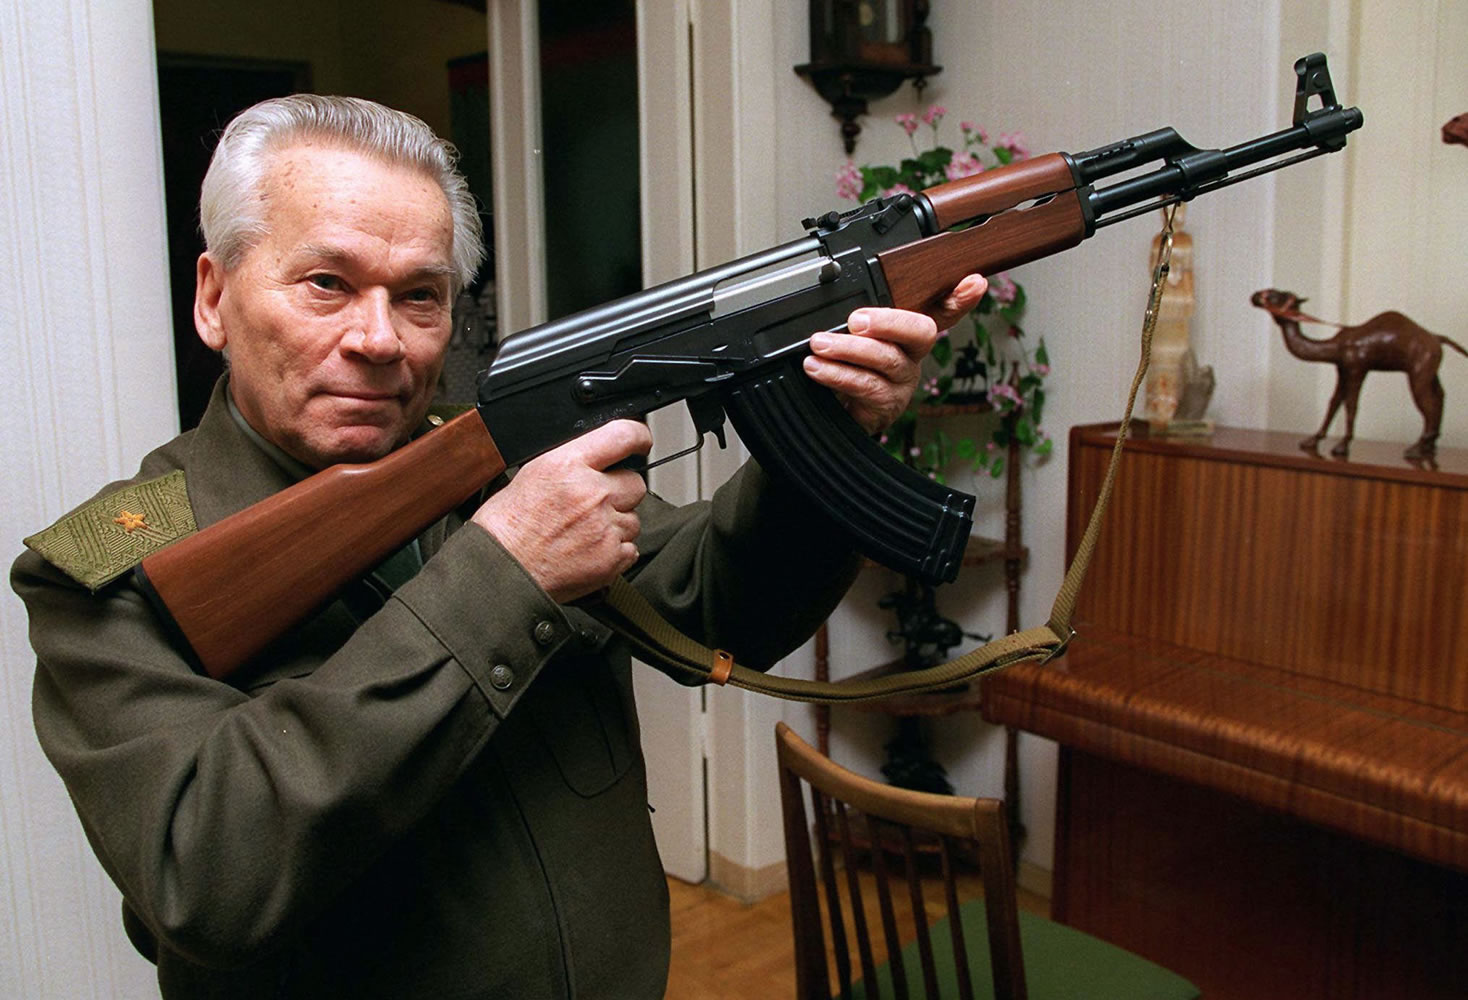 Mikhail Kalashnikov shows a model of his world-famous AK-47 assault rifle at home in the Ural Mountain city of Izhevsk, 625 miles east of Moscow in 1997.